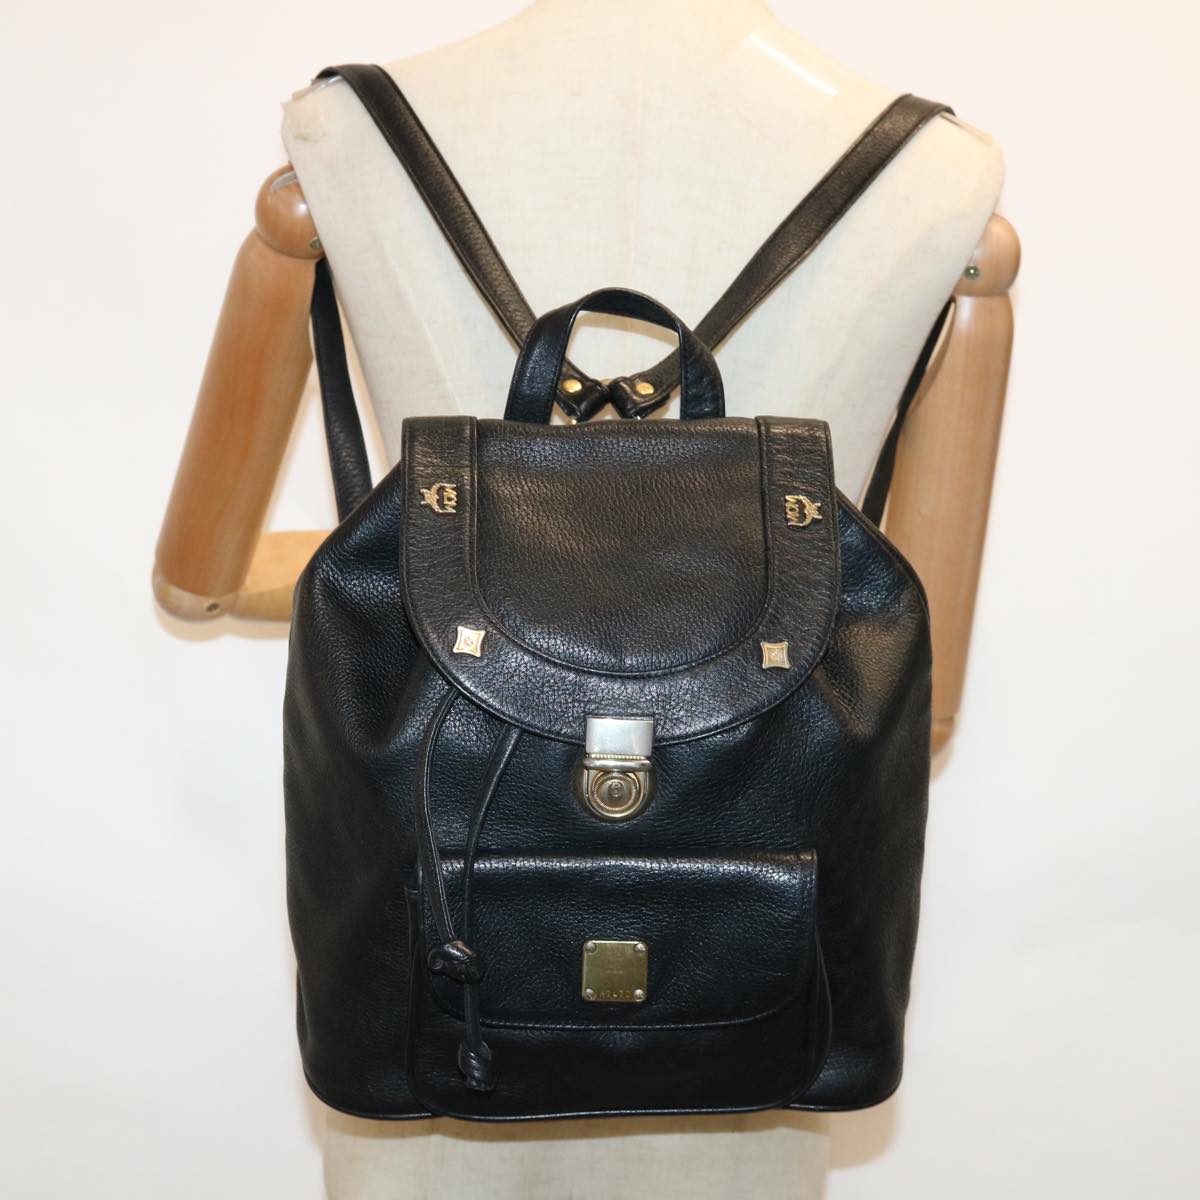 MCM Backpack Leather Black Auth hk924